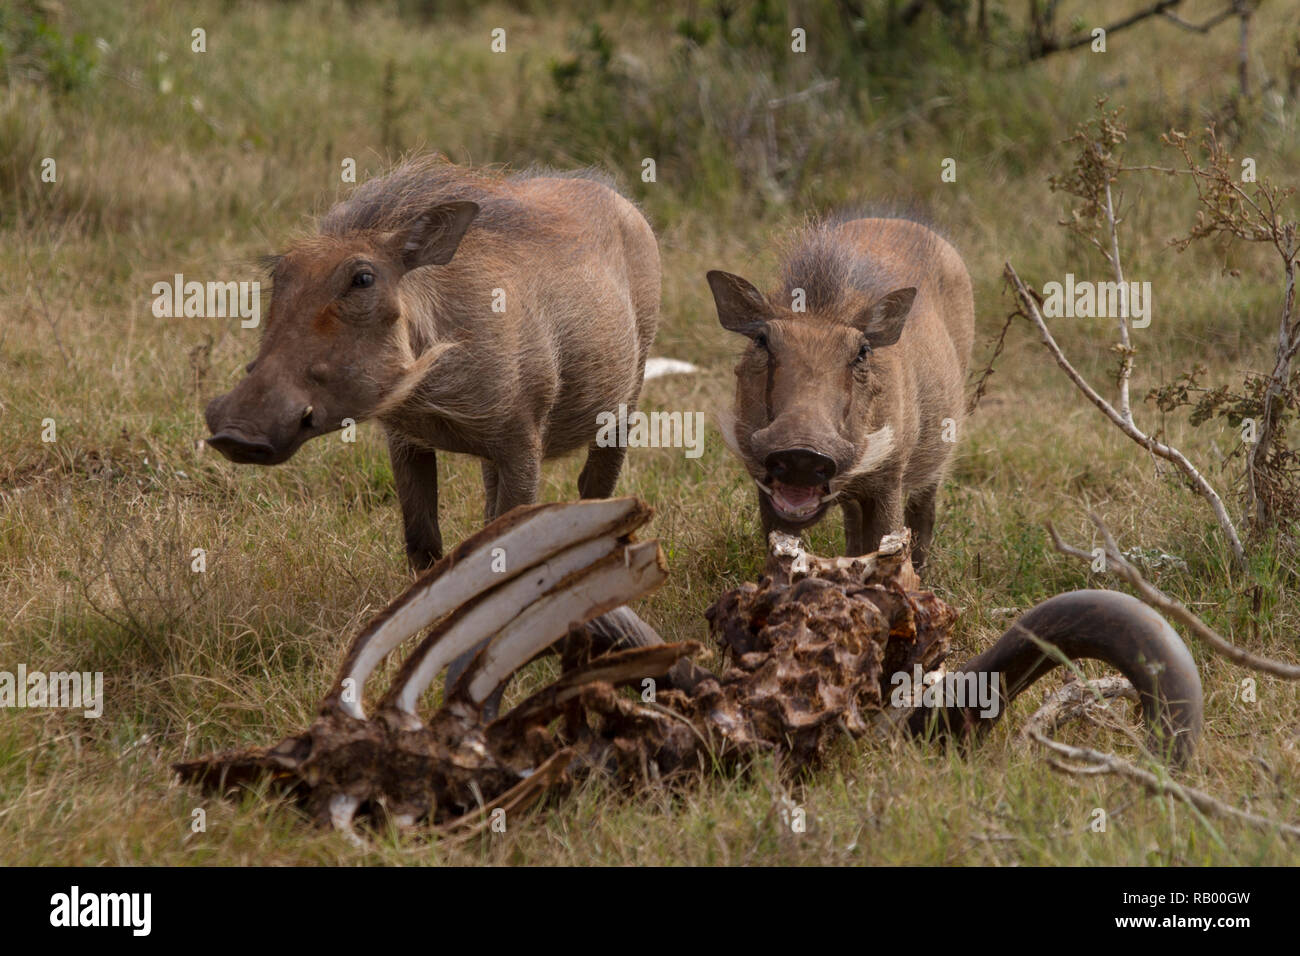 Warthogs, mainly herbivores, eating meat off a carcass in Addo Elephant National Park, South Africa. Stock Photo